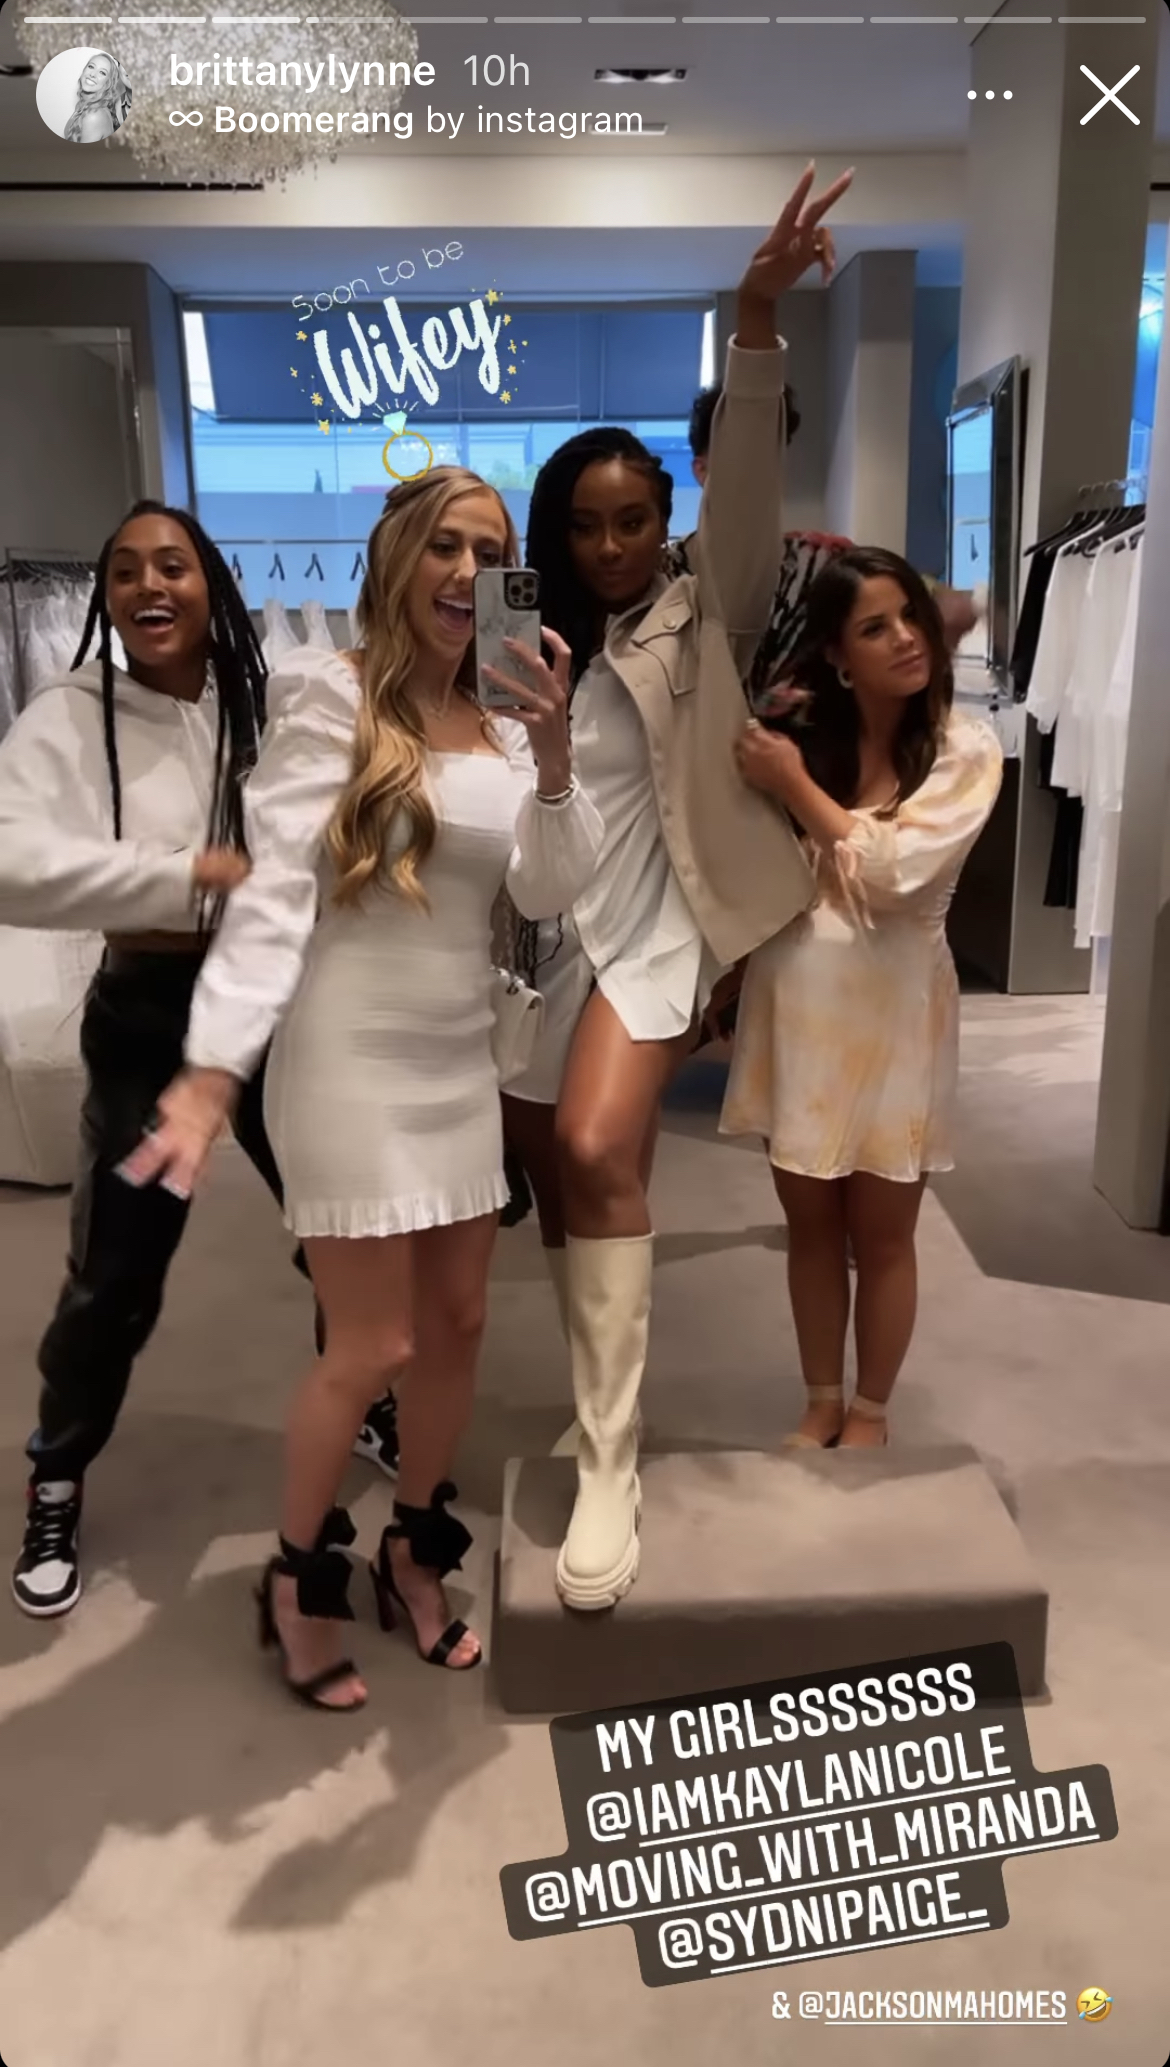 Brittany Matthews Shops for Wedding Dress With Friends: Photos